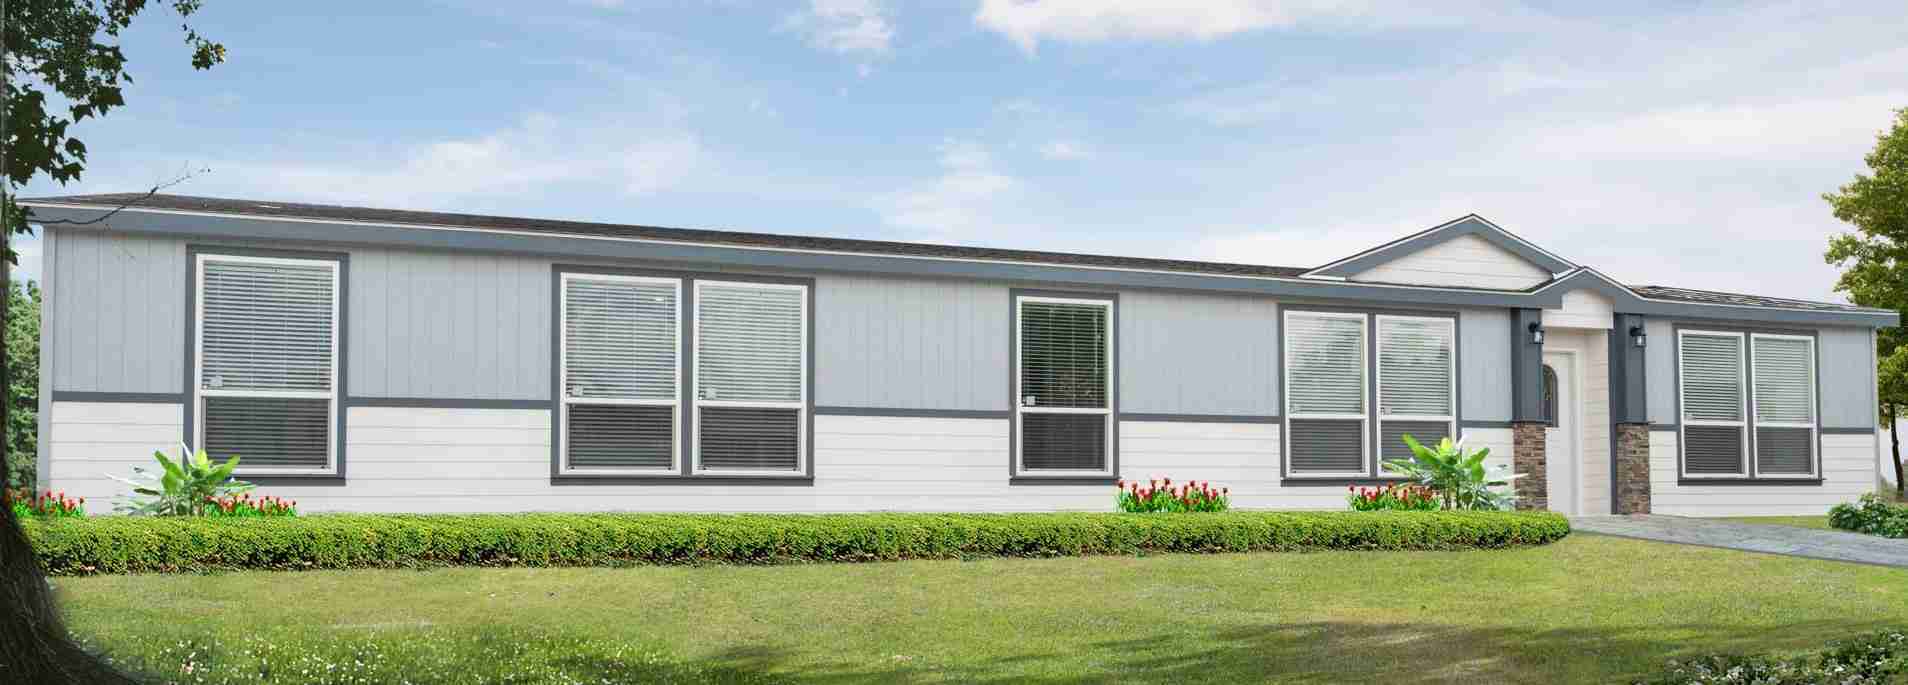 These 3 massive manufactured homes are family ready